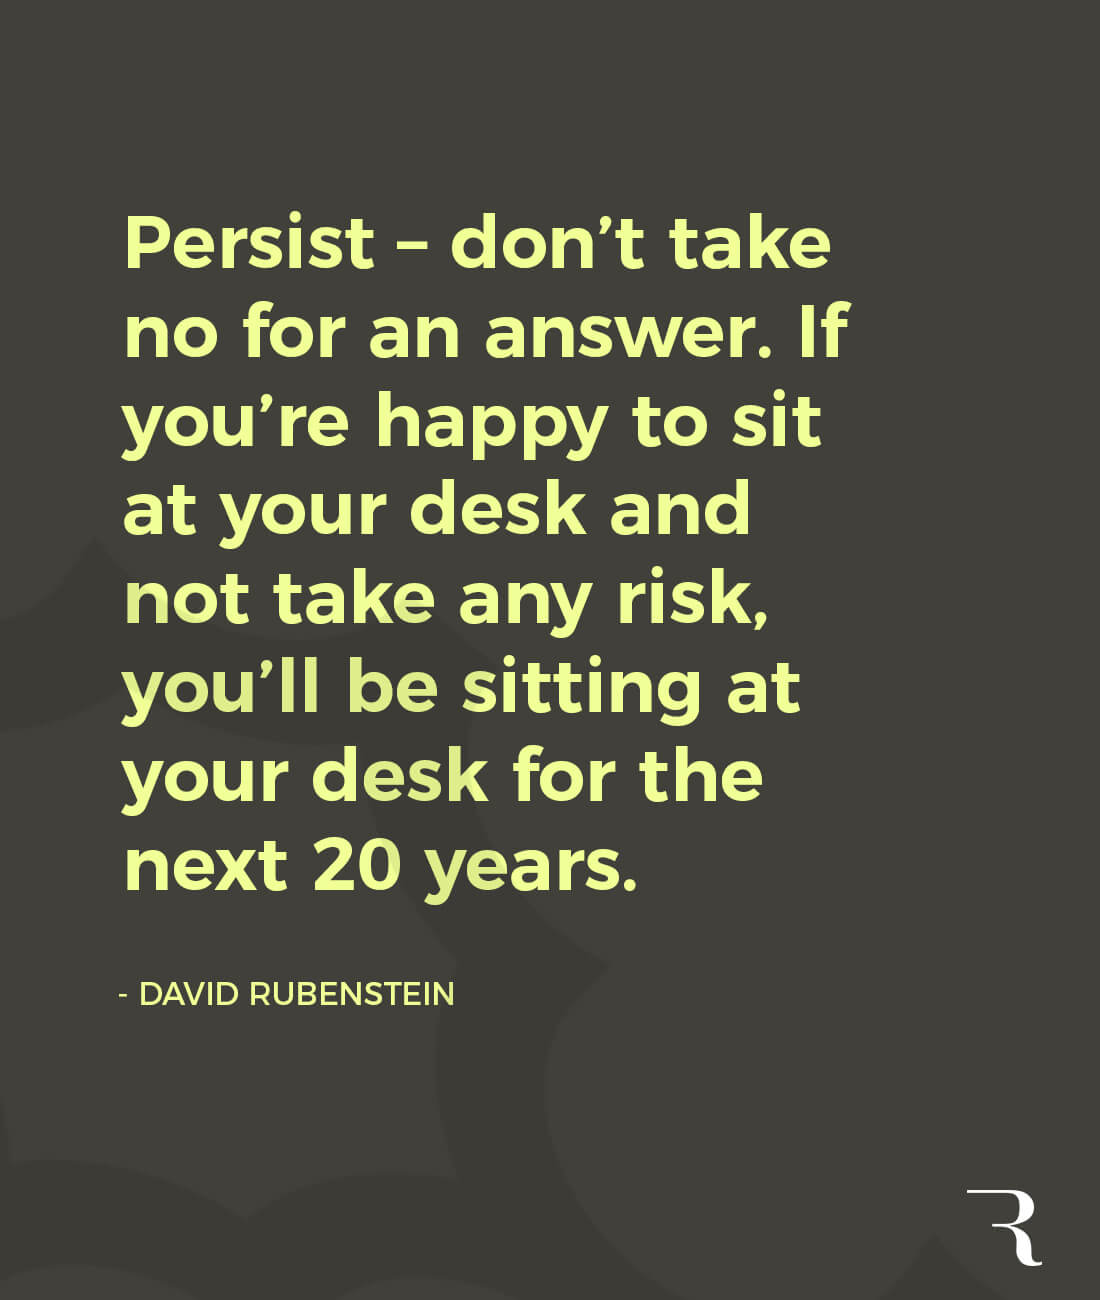 Motivational Quotes: "Don’t take no for an answer. If you don't take risks, you’ll be at your desk forever." 112 Motivational Quotes to Be a Better Entrepreneur